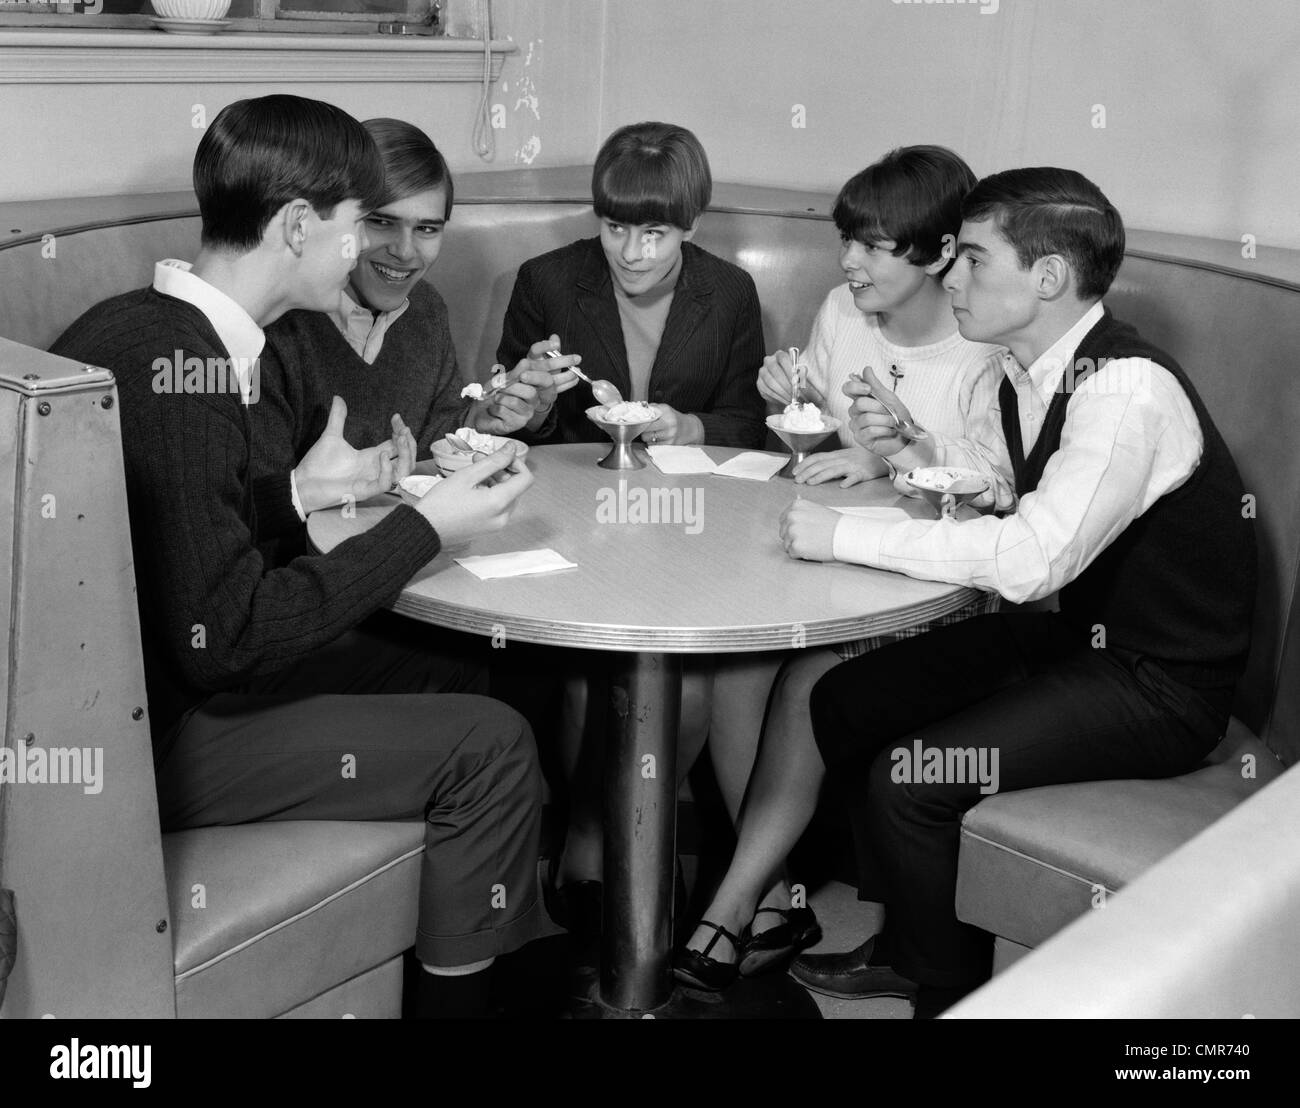 1960s GROUP OF 5 TEENS SITTING AT ROUND BOOTH EATING ICE CREAM SUNDAES & TALKING Stock Photo